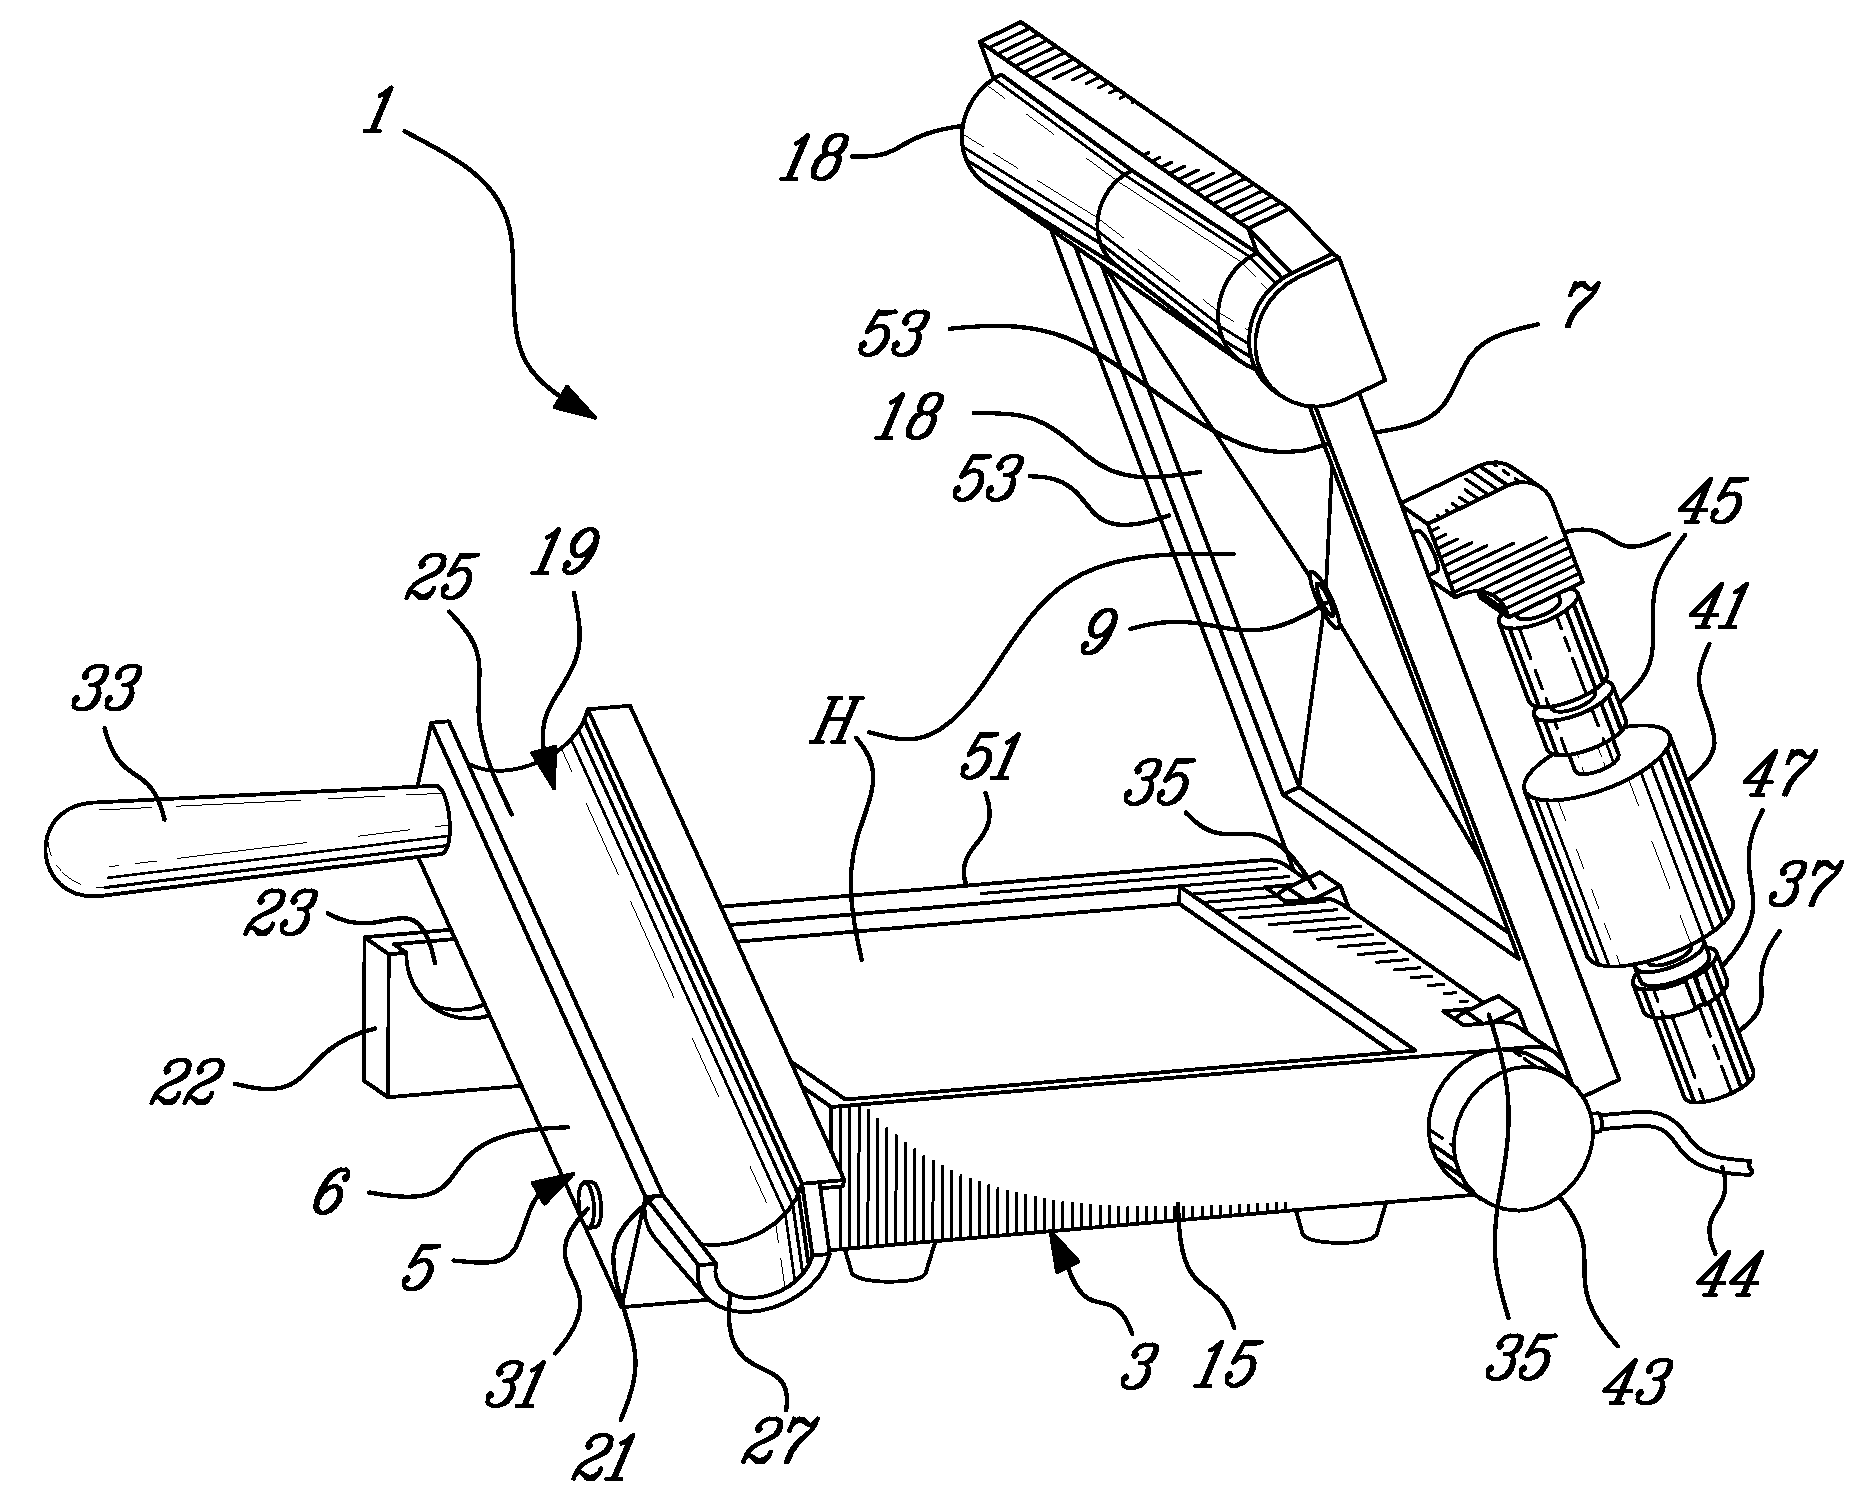 Self-cleaning pill counting device, and cleaning method